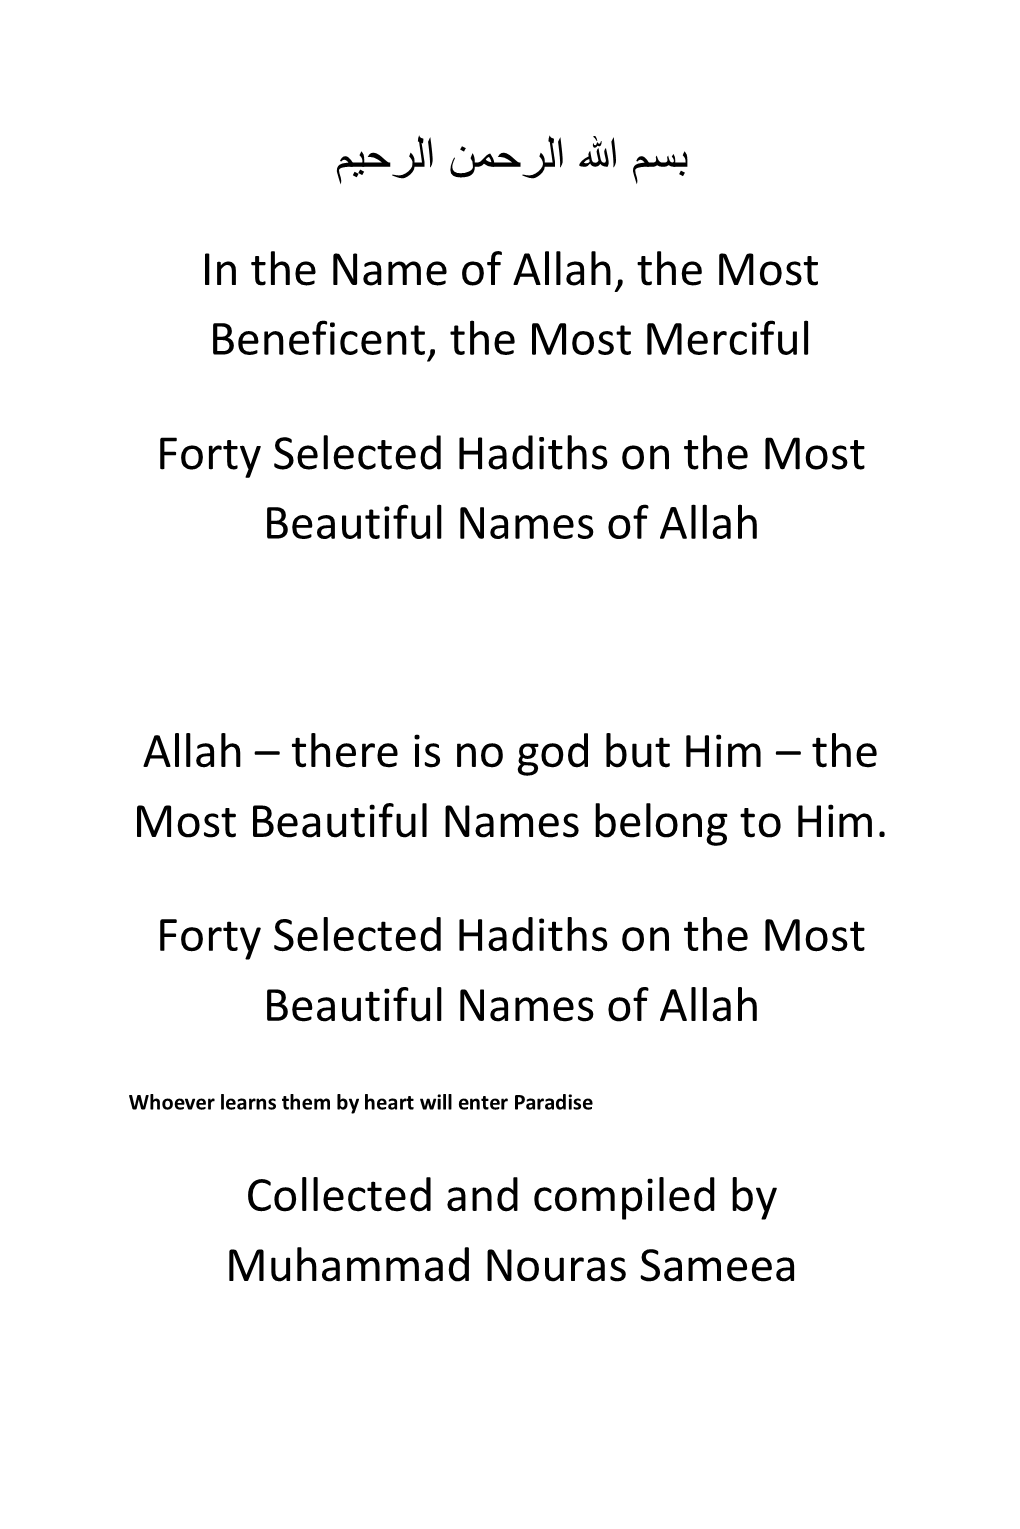 Forty Selected Hadiths on the Most Beautiful Names of Allah